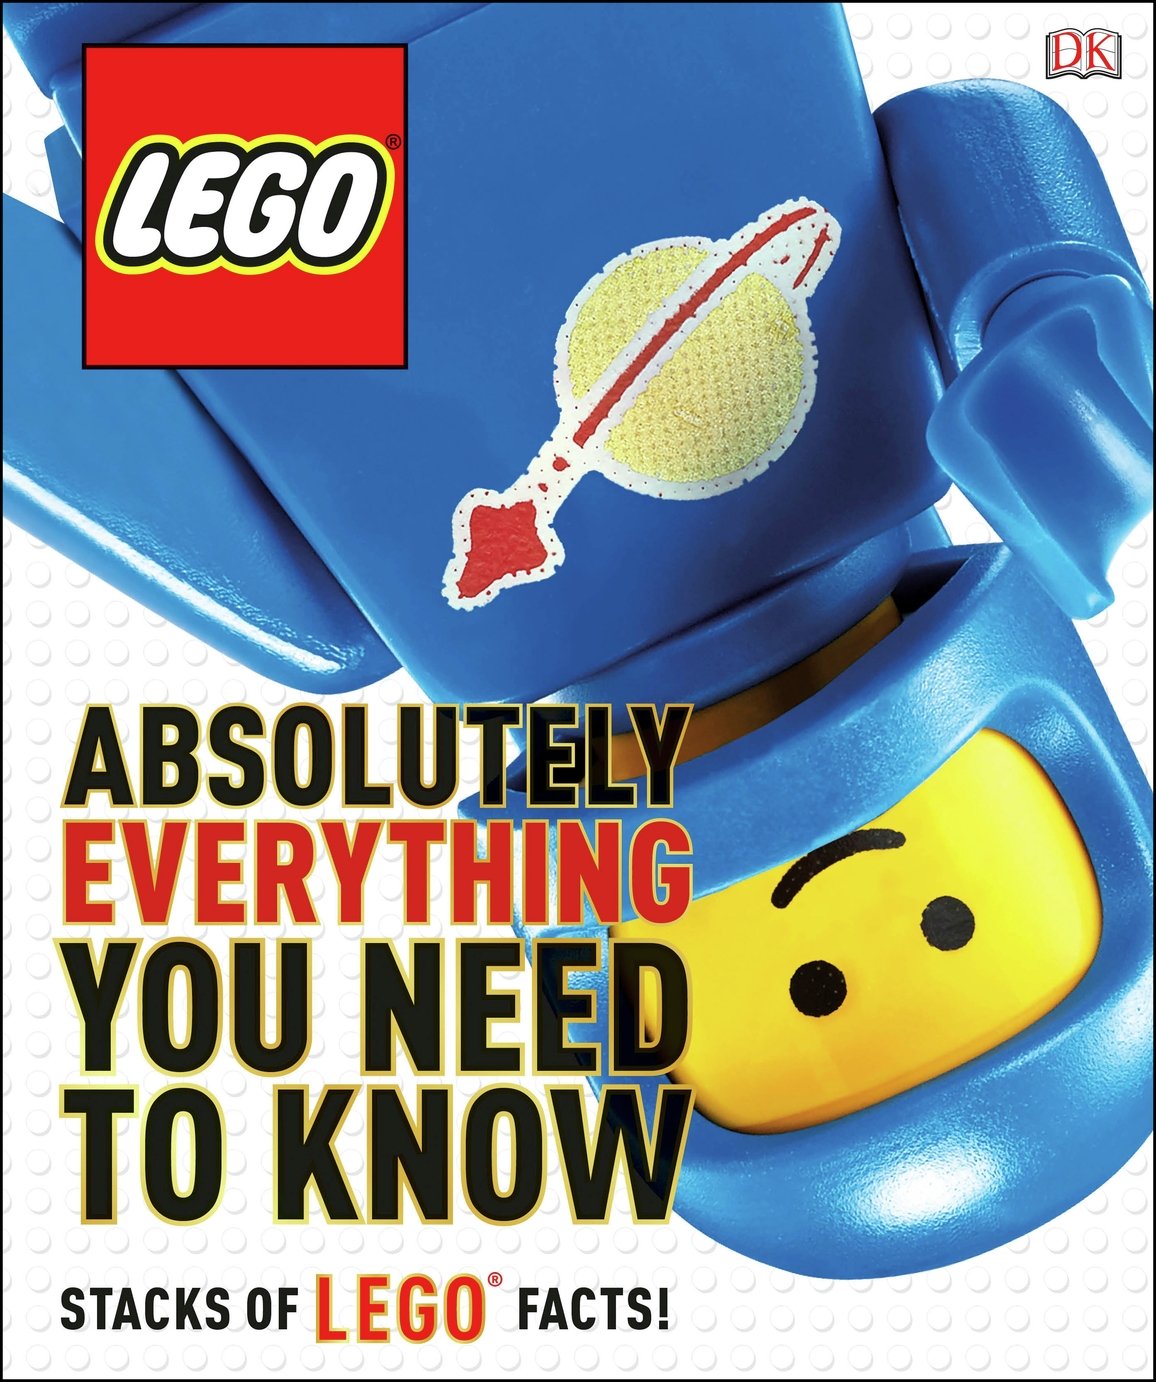 LEGO: Absolutely Everything You Need To Know